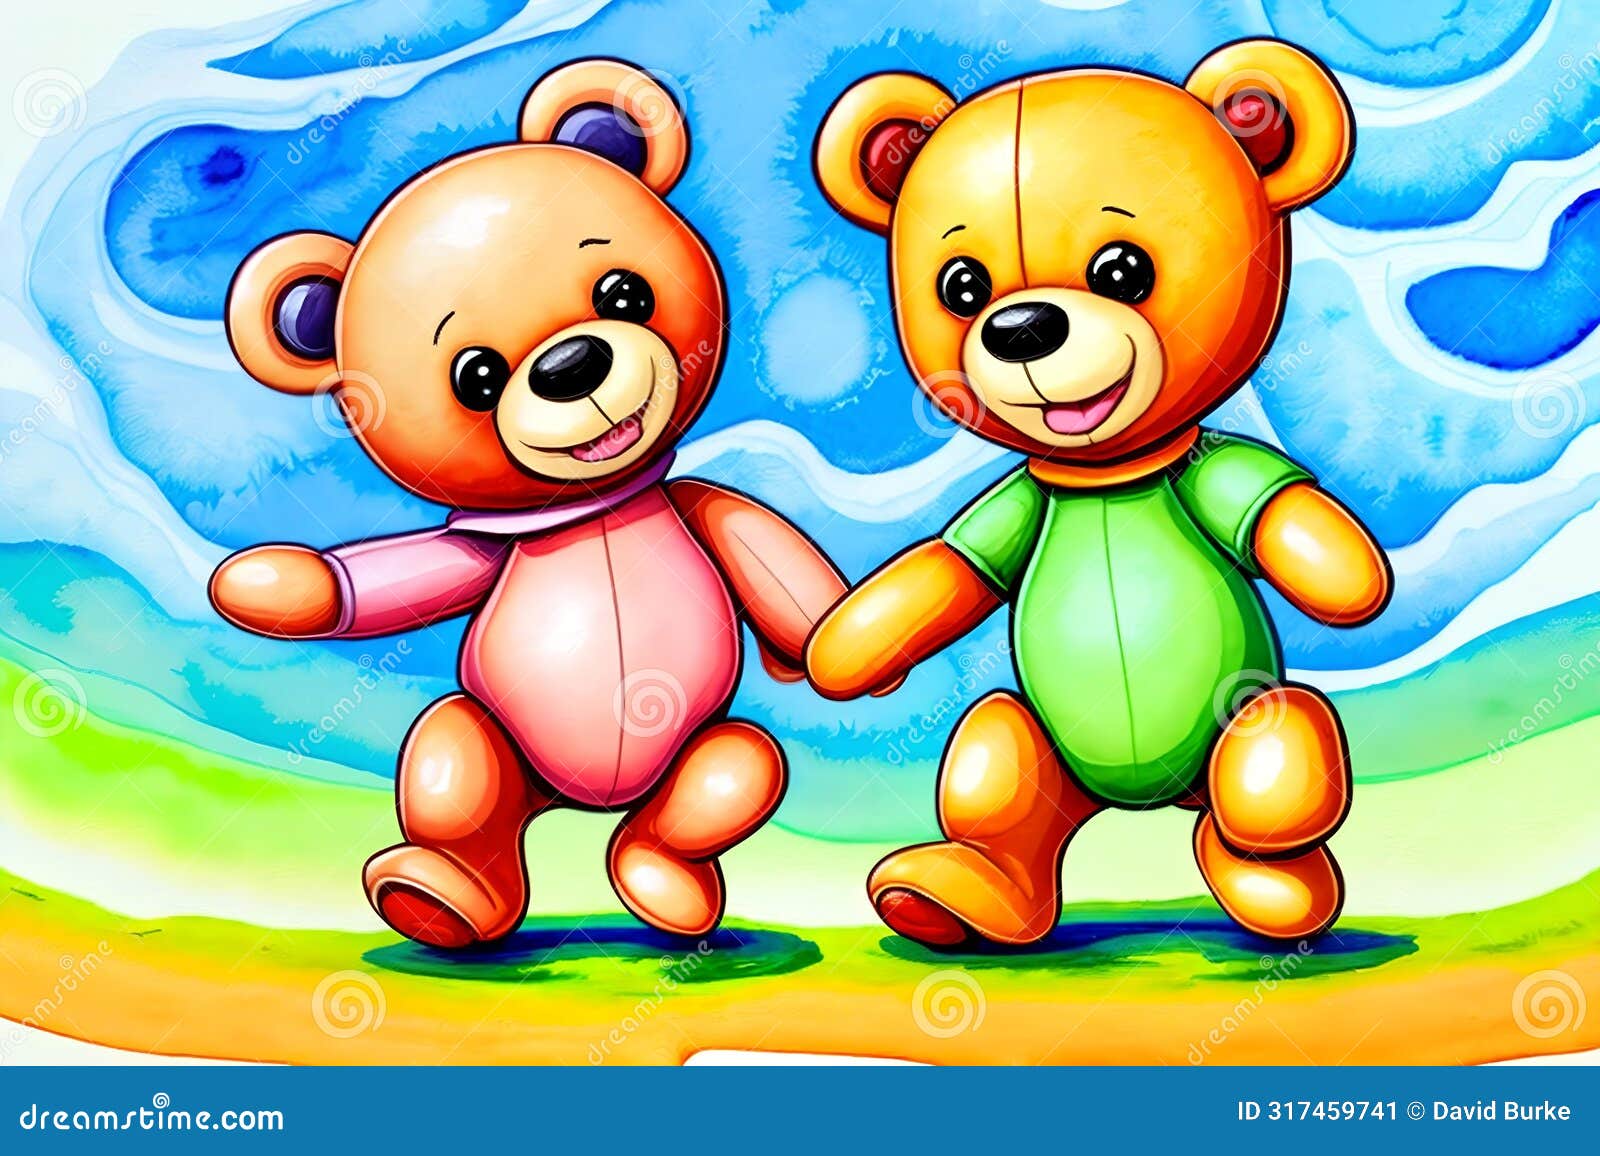 cartoon comic smile teddy bear holding hands together favorite child toy